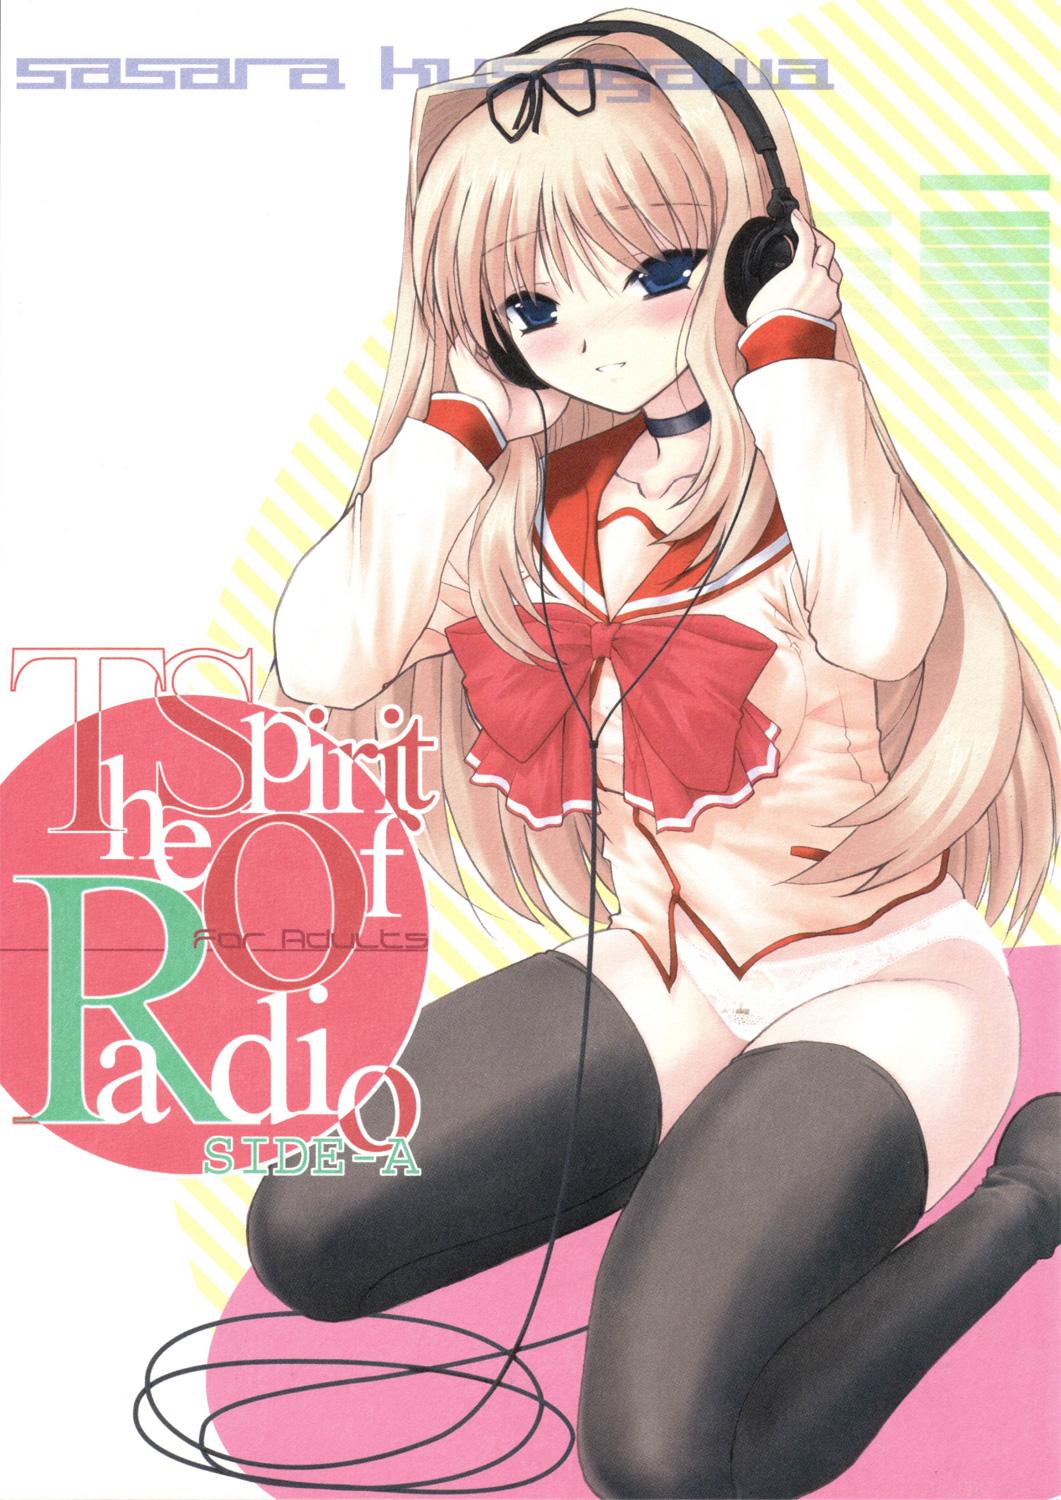 Hardcore Porn The Spirit Of Radio SIDE-A - Toheart2 Amateur Sex - Picture 1